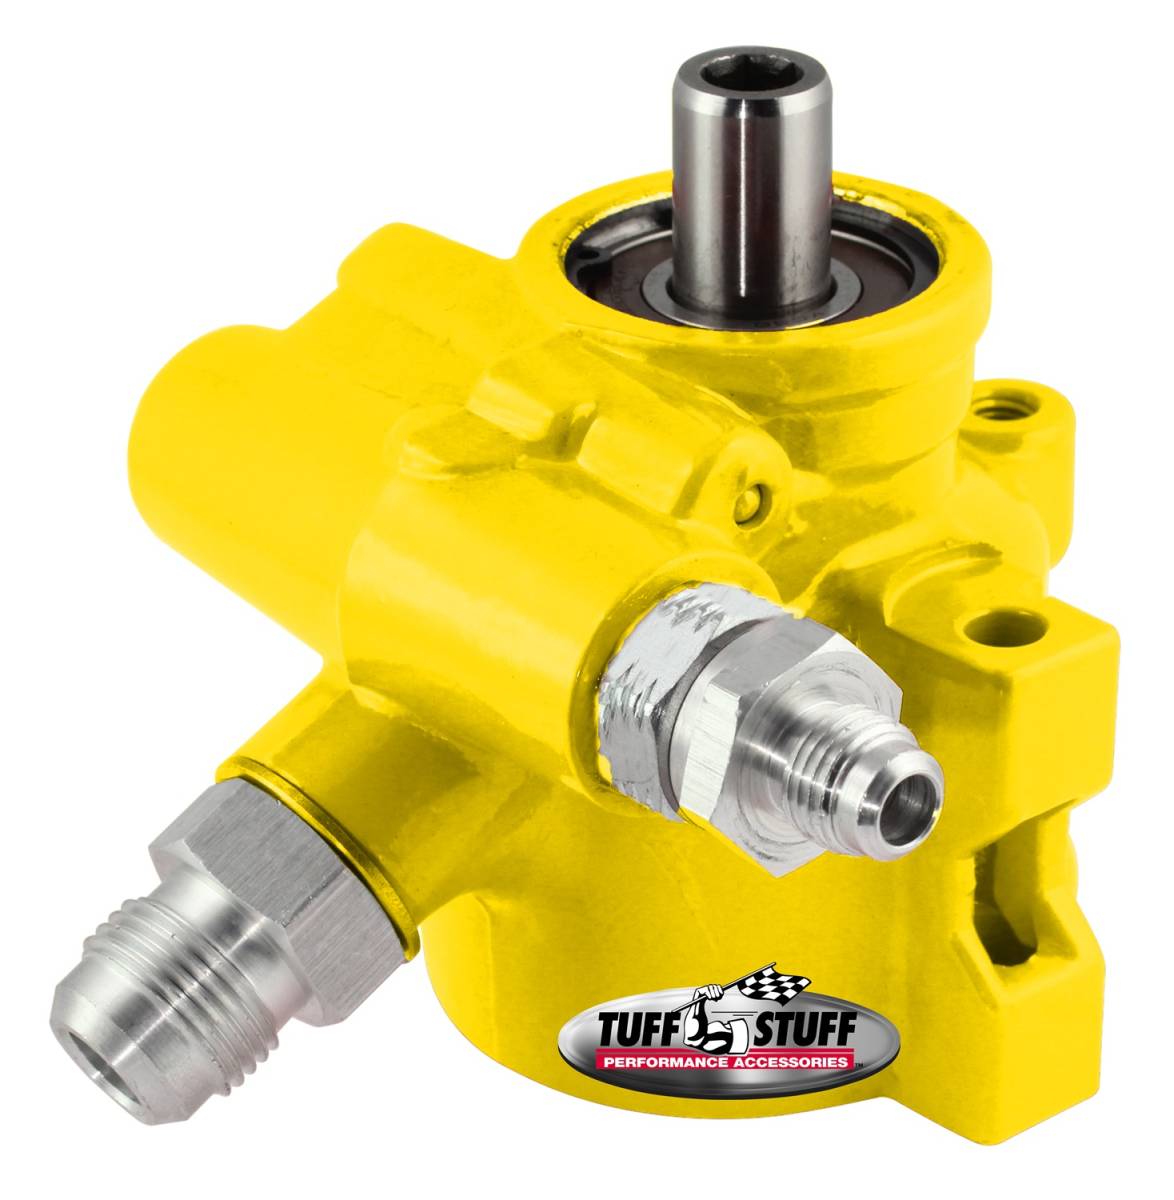 Tuff Stuff Performance - Type II Alum. Power Steering Pump AN-6 And AN-10 Fittings 8mm Through Hole Mounting Aluminum For Street Rods/Custom Vehicles w/Limited Engine Space Yellow 6175ALYELLOW